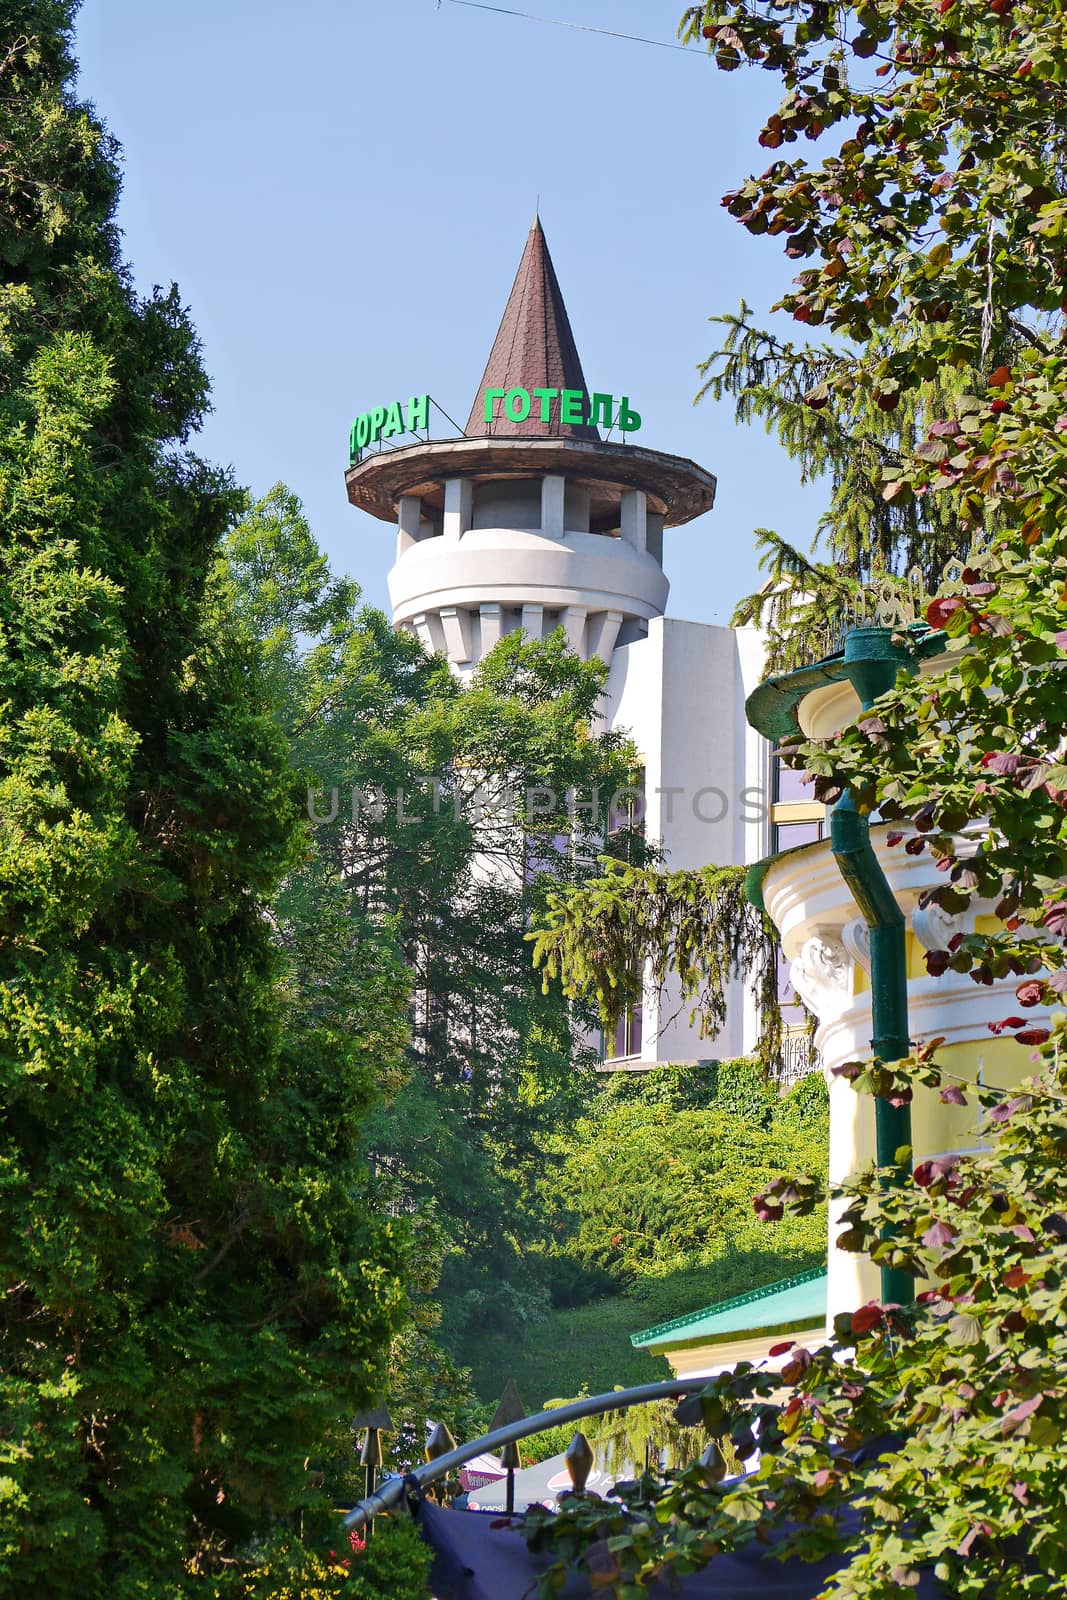 The cone-shaped top of the hotel building is similar to the gnome's cap by Adamchuk